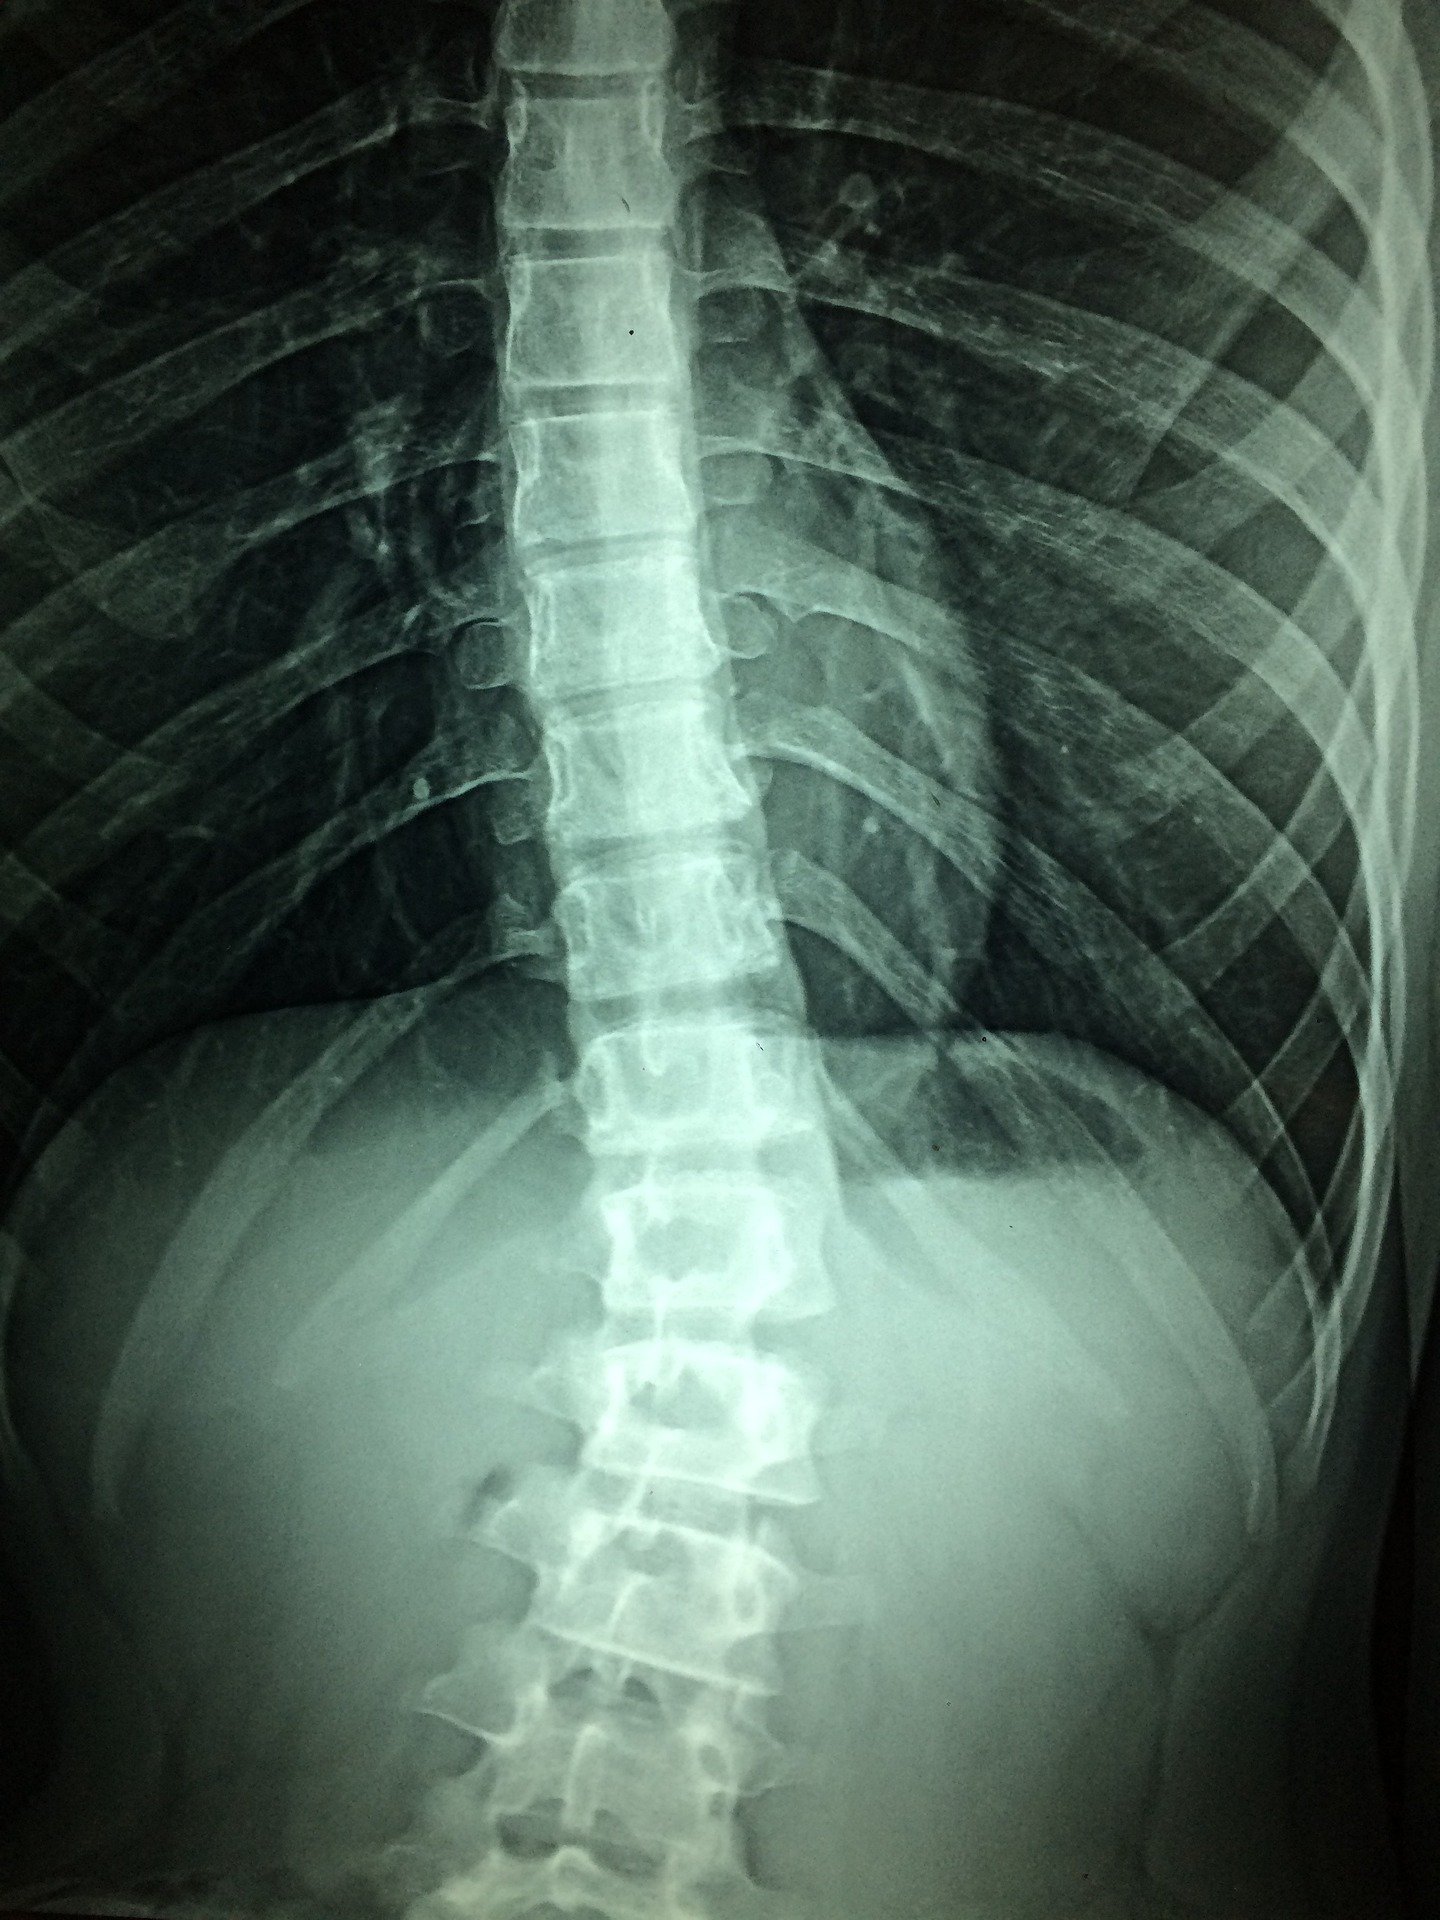 From Scientist to Innovators: improving the life of patients after spinal surgery